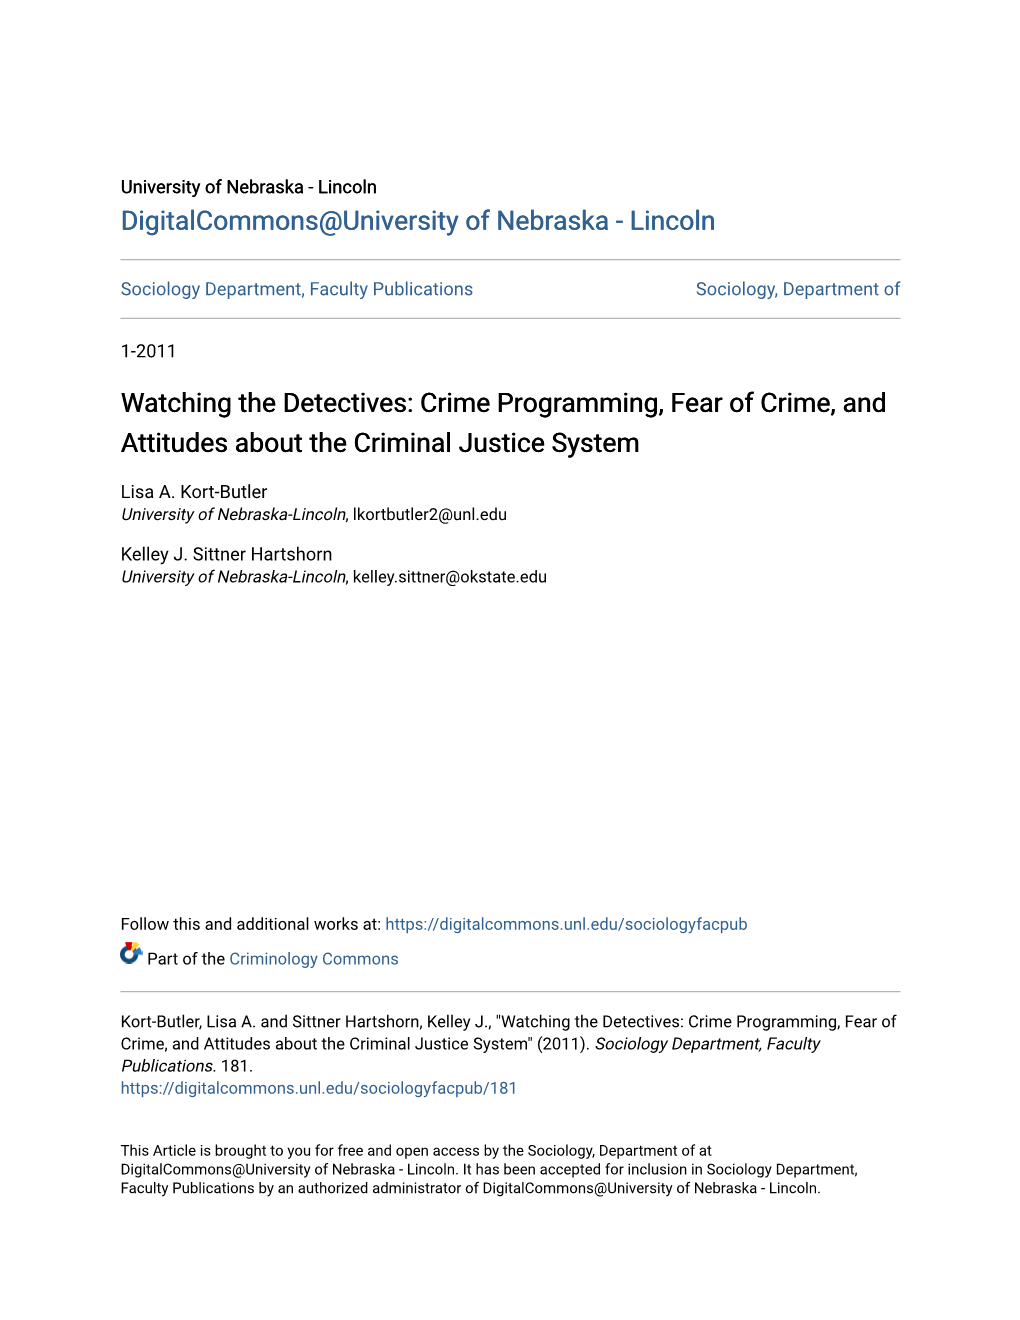 Crime Programming, Fear of Crime, and Attitudes About the Criminal Justice System